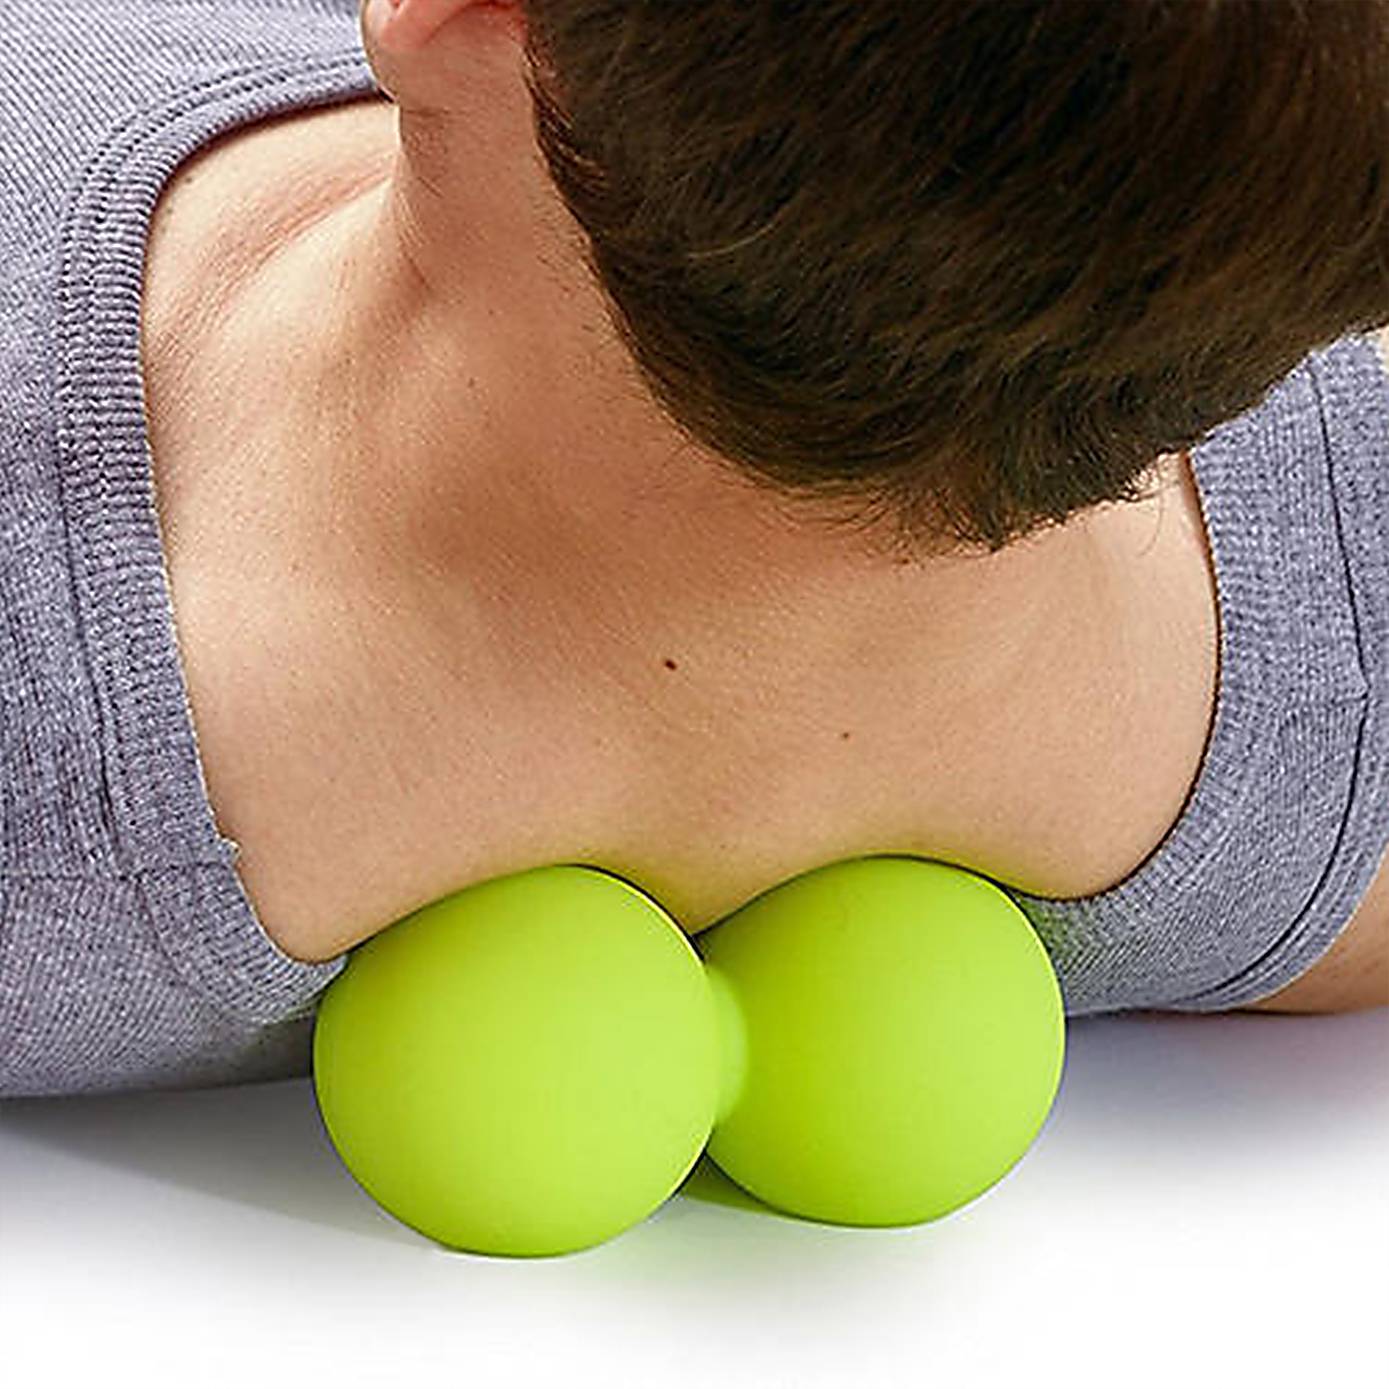 5BILLION Double Massage Ball Double Lacrosse Ball Foot Deep Tissue Massage Tool for Back Neck Therapy Peanut Ball Stress Ball